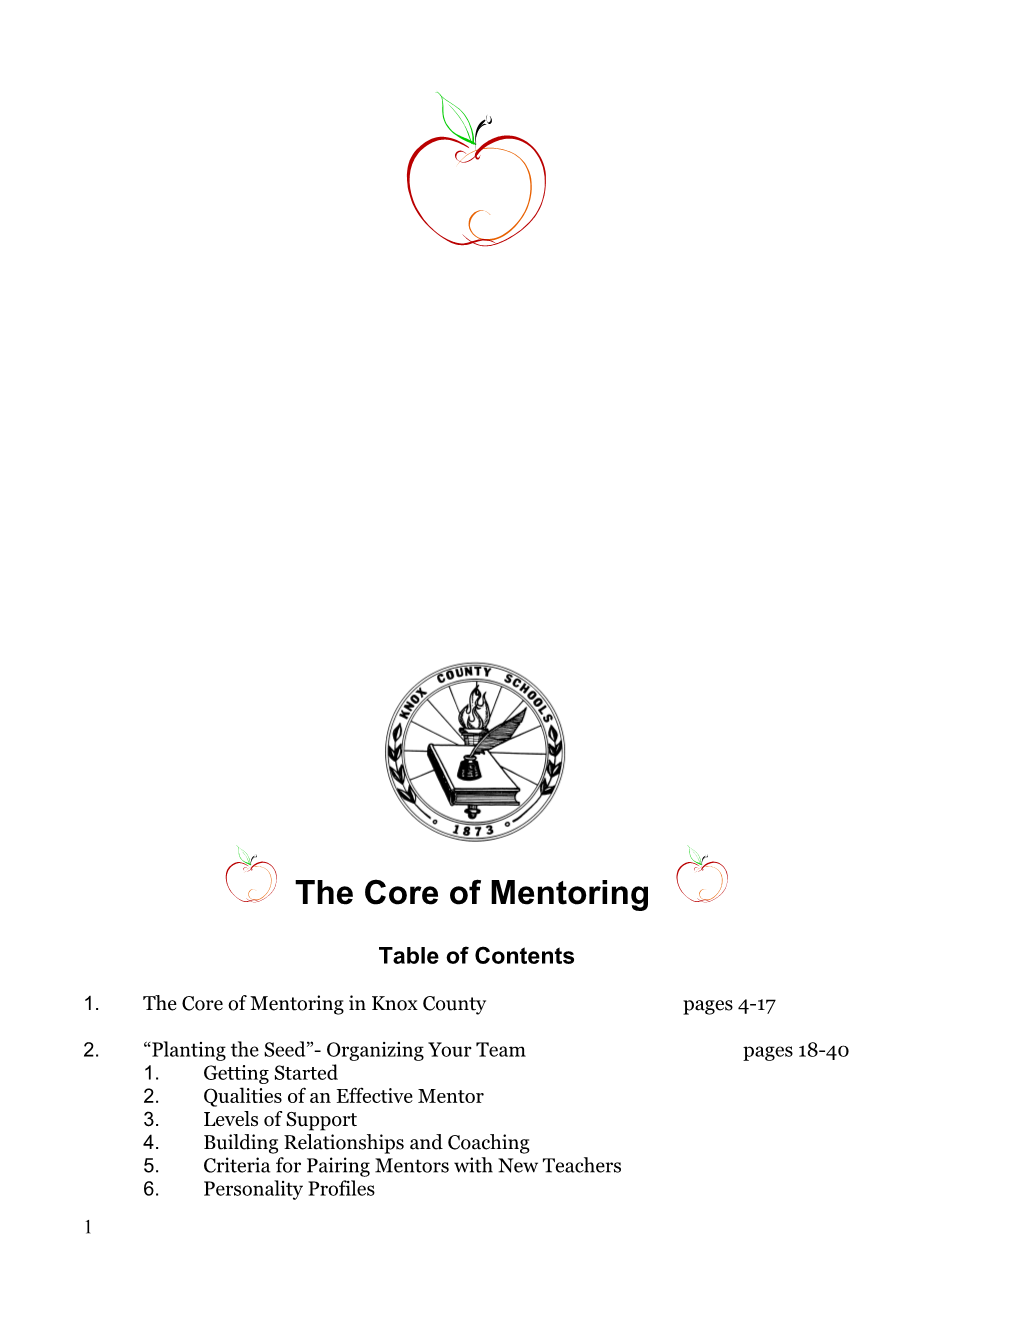 The Core of Mentoring